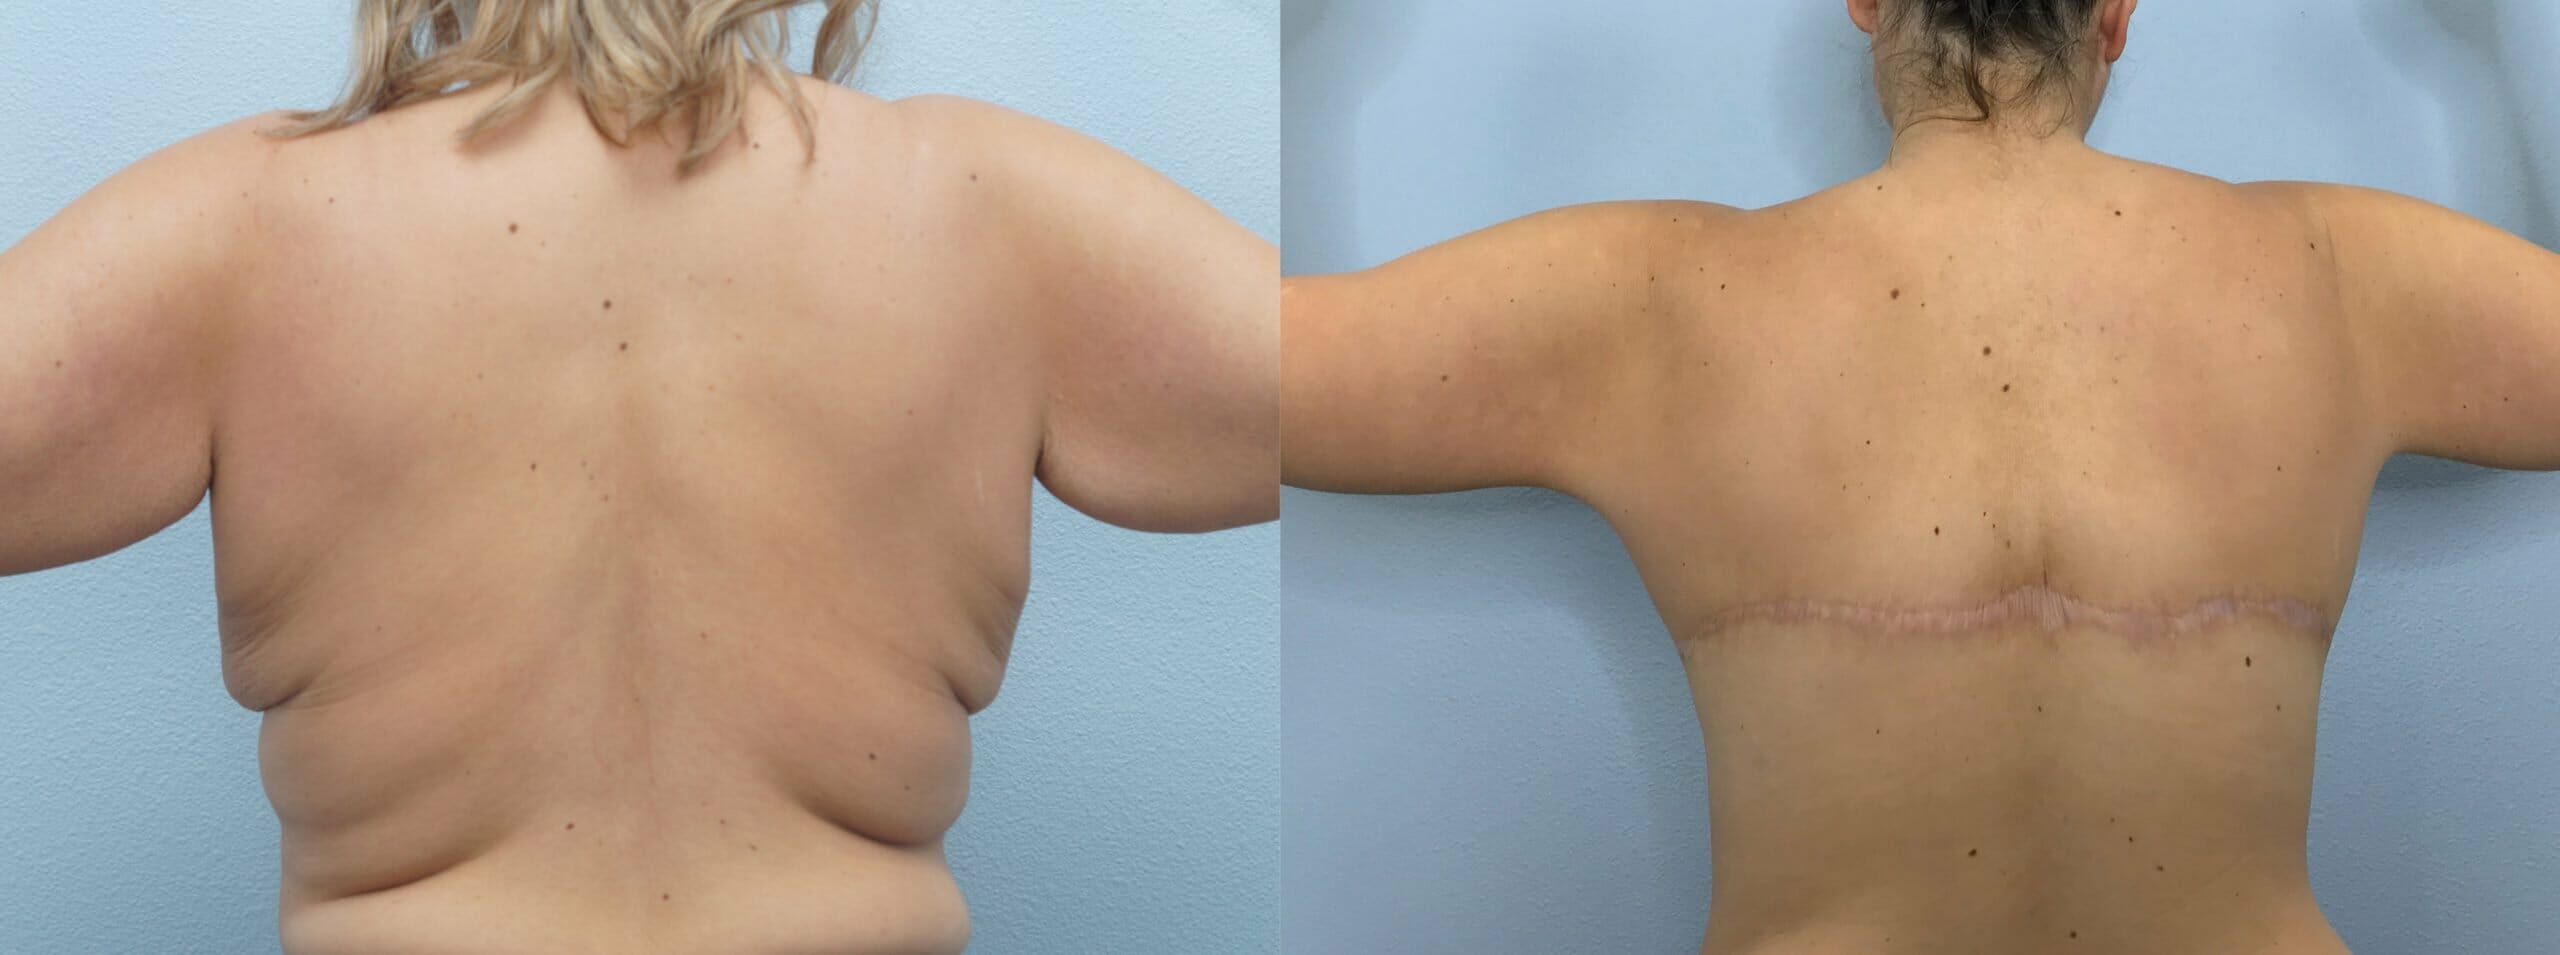 This is a Bra-Line Back Lift. It's an incredible surgery to